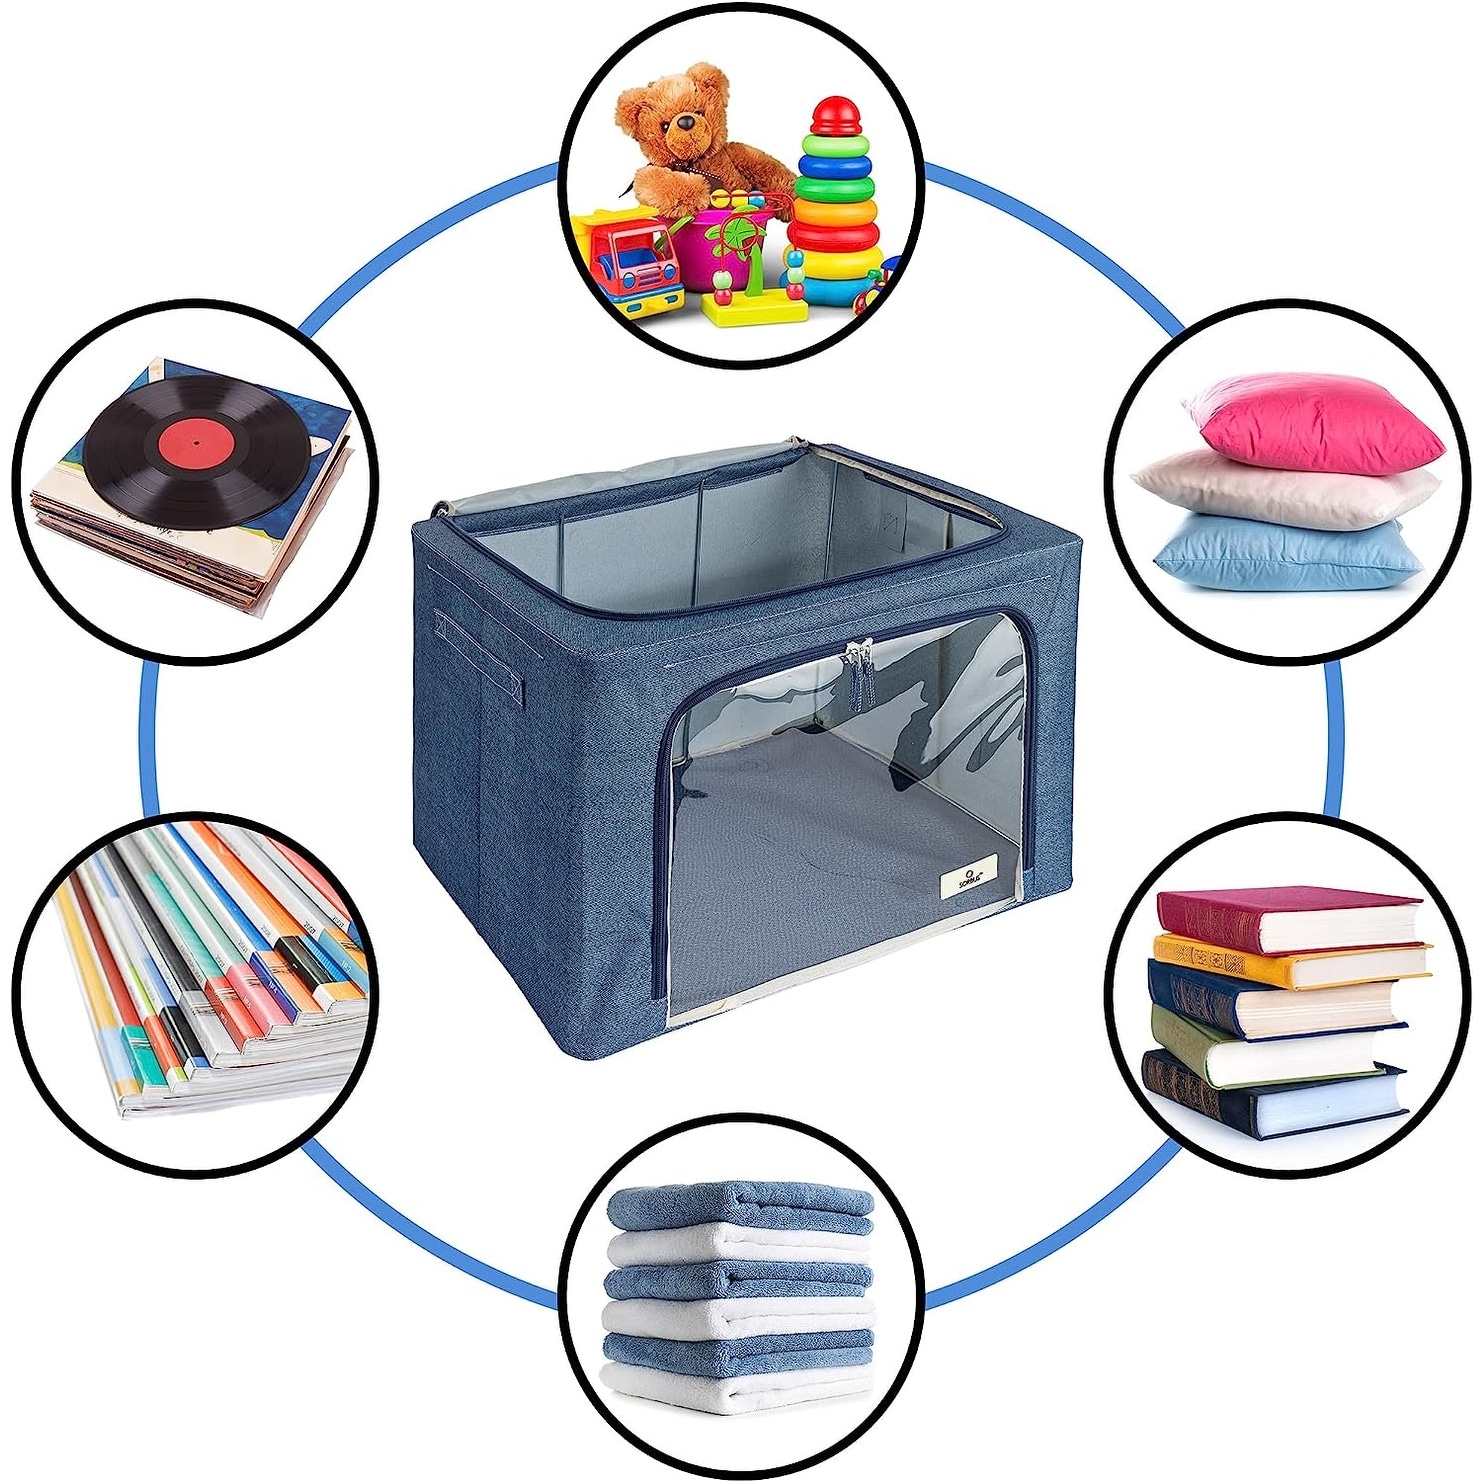 https://ak1.ostkcdn.com/images/products/is/images/direct/d341a0e9a3485248bcef24c6e6b5b46d35294a9c/Storage-Bins%2C-Foldable-Stackable-Container-Organizer-Set-with-Large-Window-%26-Carry-Handles.jpg